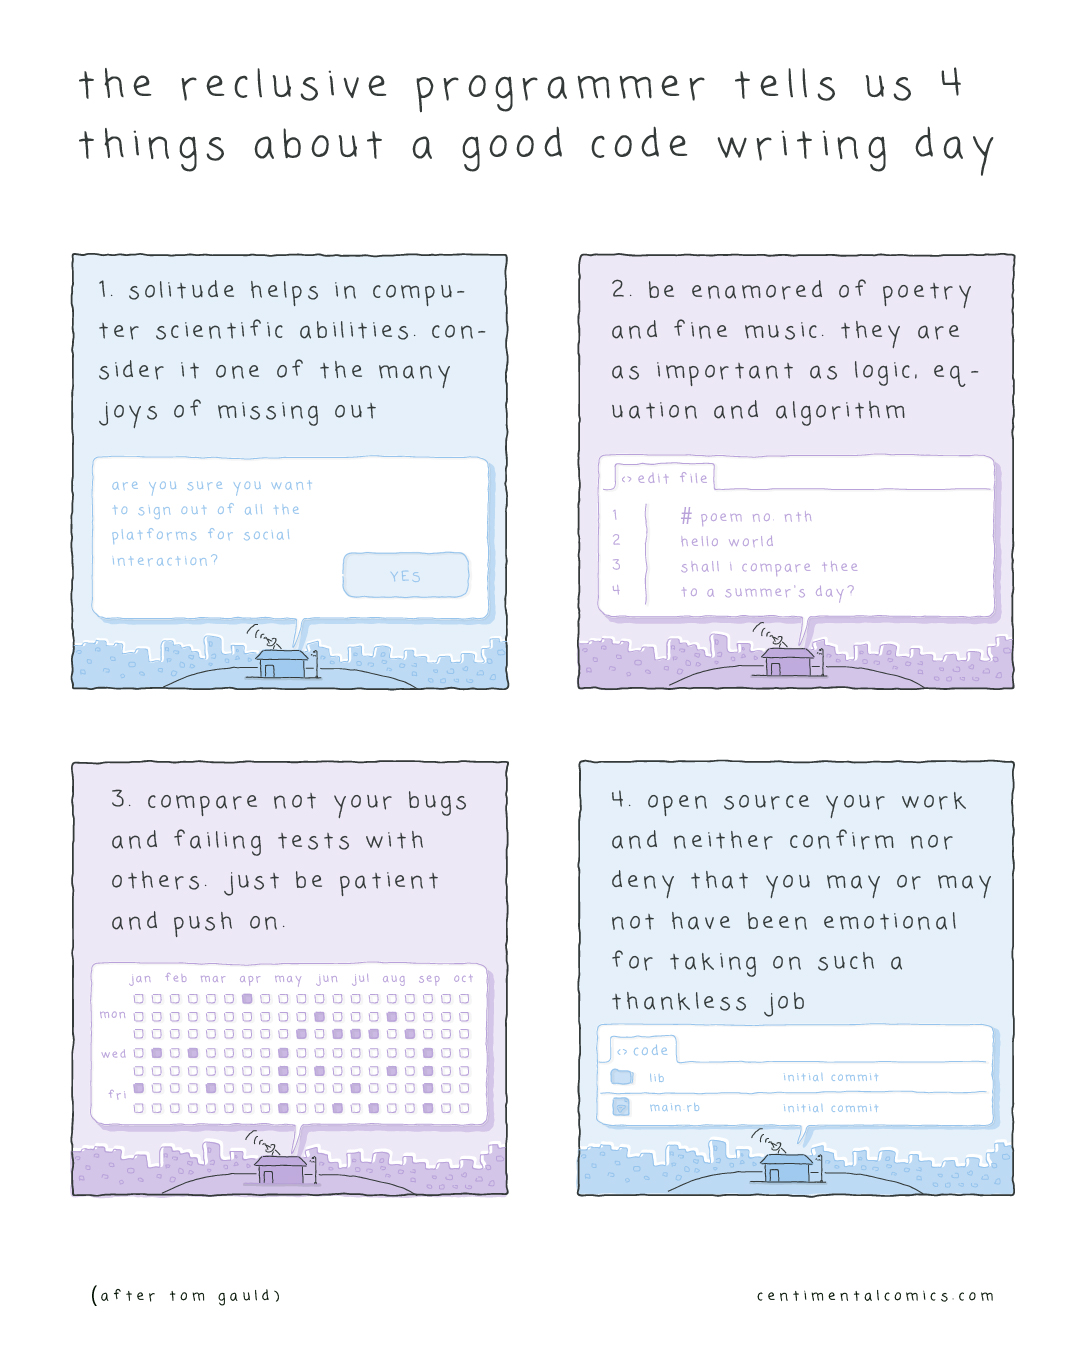 the reclusive programmer tells us 4 things about a good code writing day